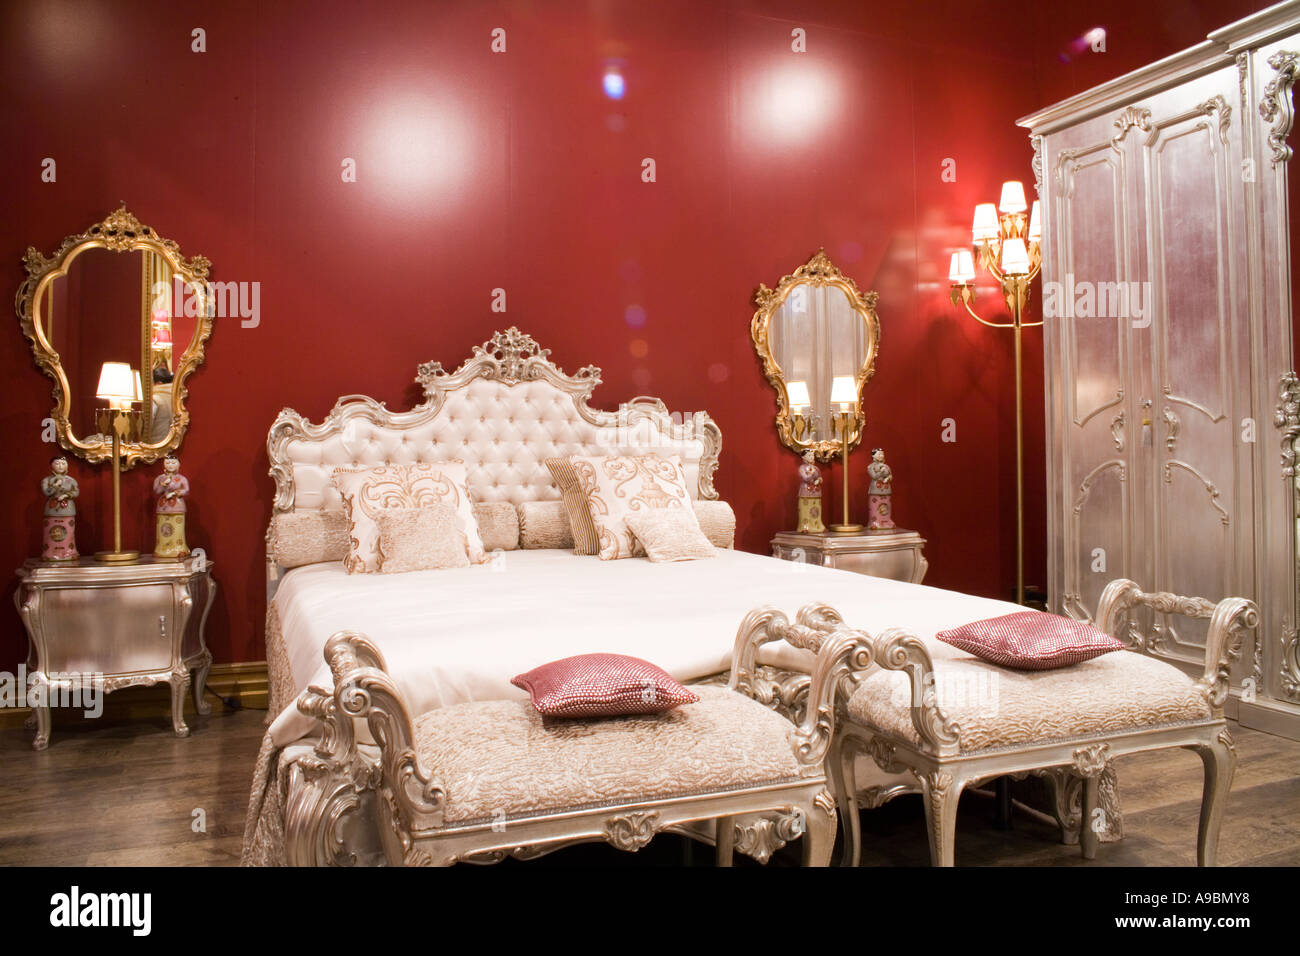 Silver finished capitonè bed with dormeuses at its feet and wardrobe red wall bedroom Stock Photo